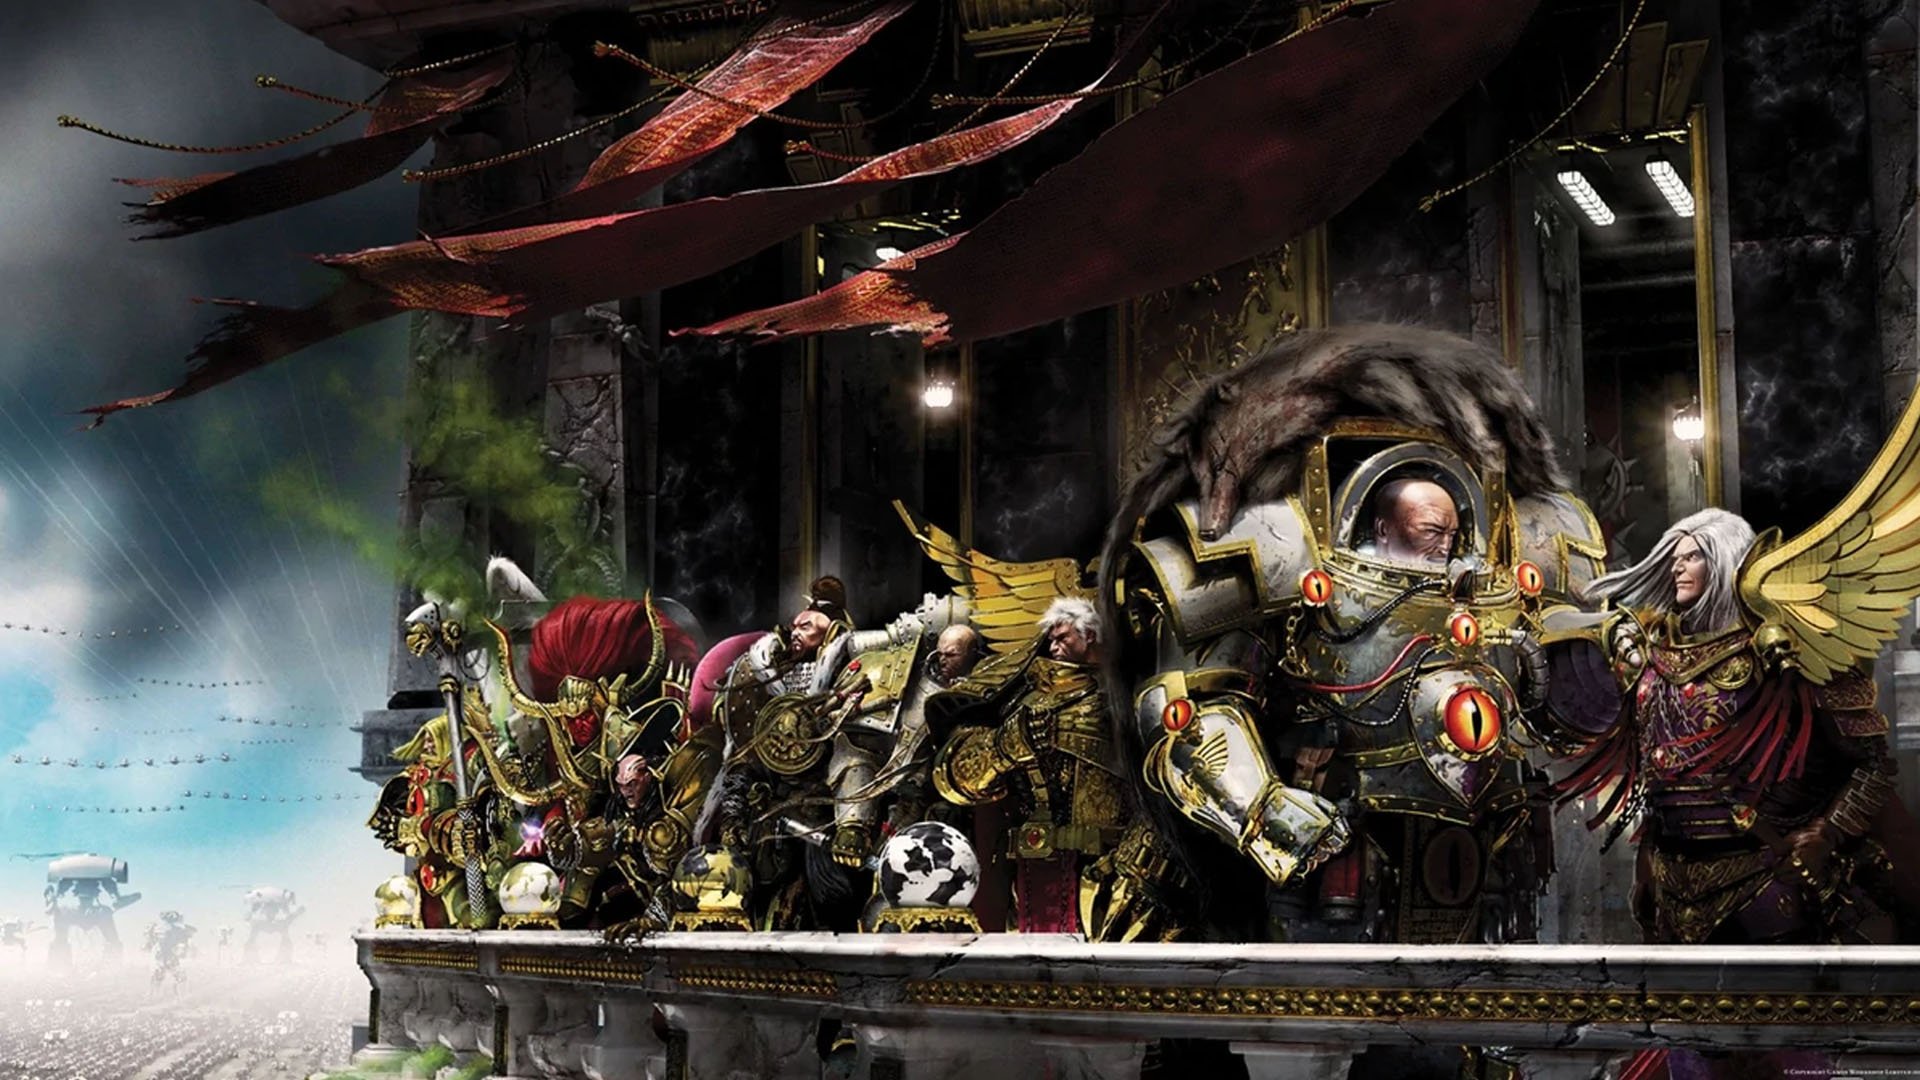 Warhammer 40k Emperor of Mankind guide - Games Workshop artwork showing the Primarchs at the triumph of Ullanor